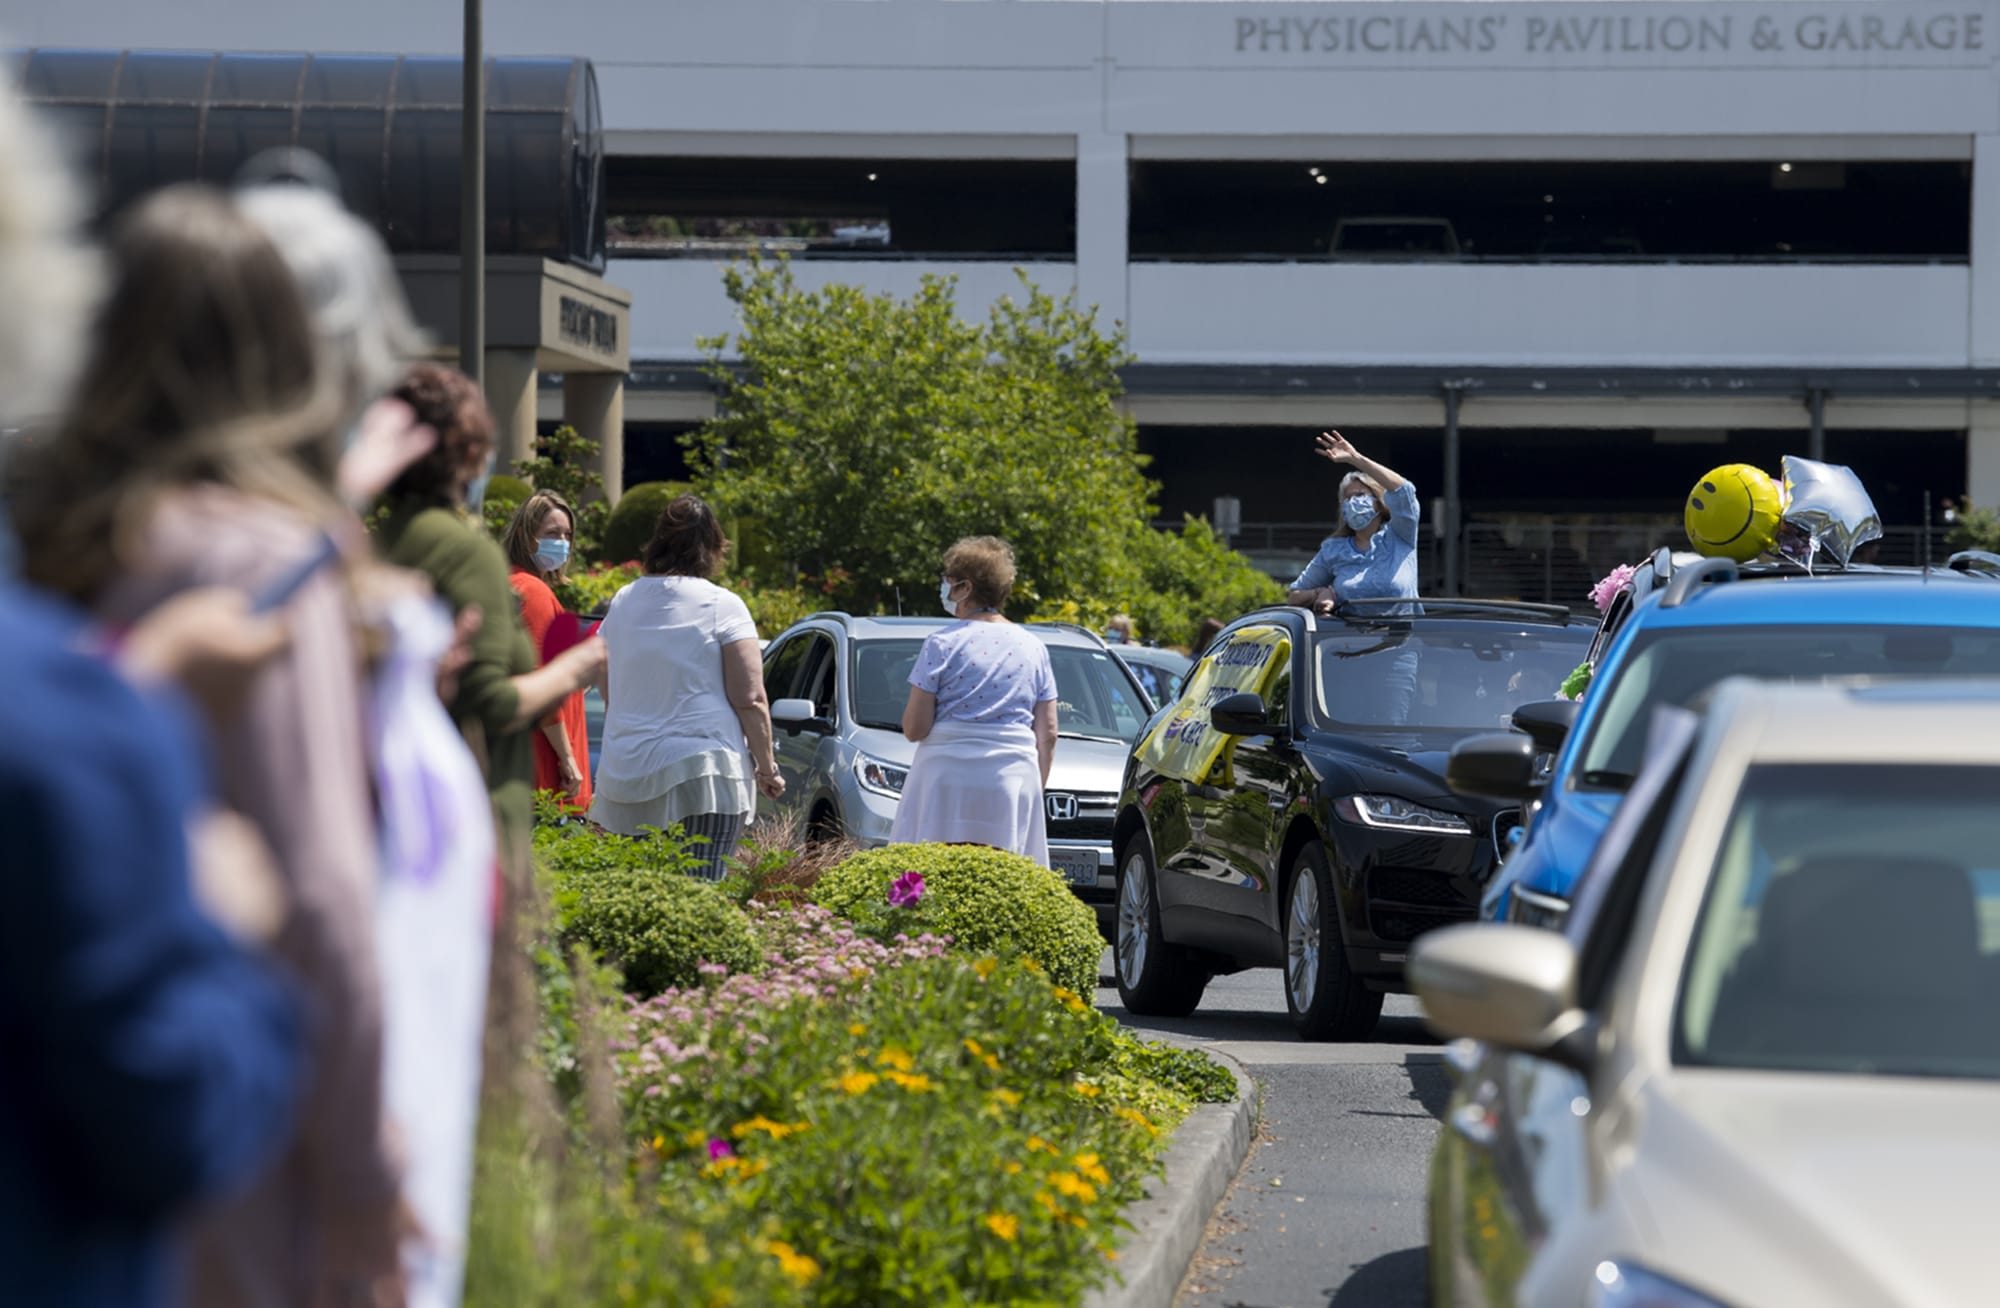 Vivian DiGioia of the stroke/brain support group, center in blue, greets hospital staff during a motorcade welcoming back volunteers at PeaceHealth Southwest Medical Center on Thursday afternoon, June 18, 2020. Around 40 volunteers, who have been furloughed since March 18, came out for the warm welcome back.